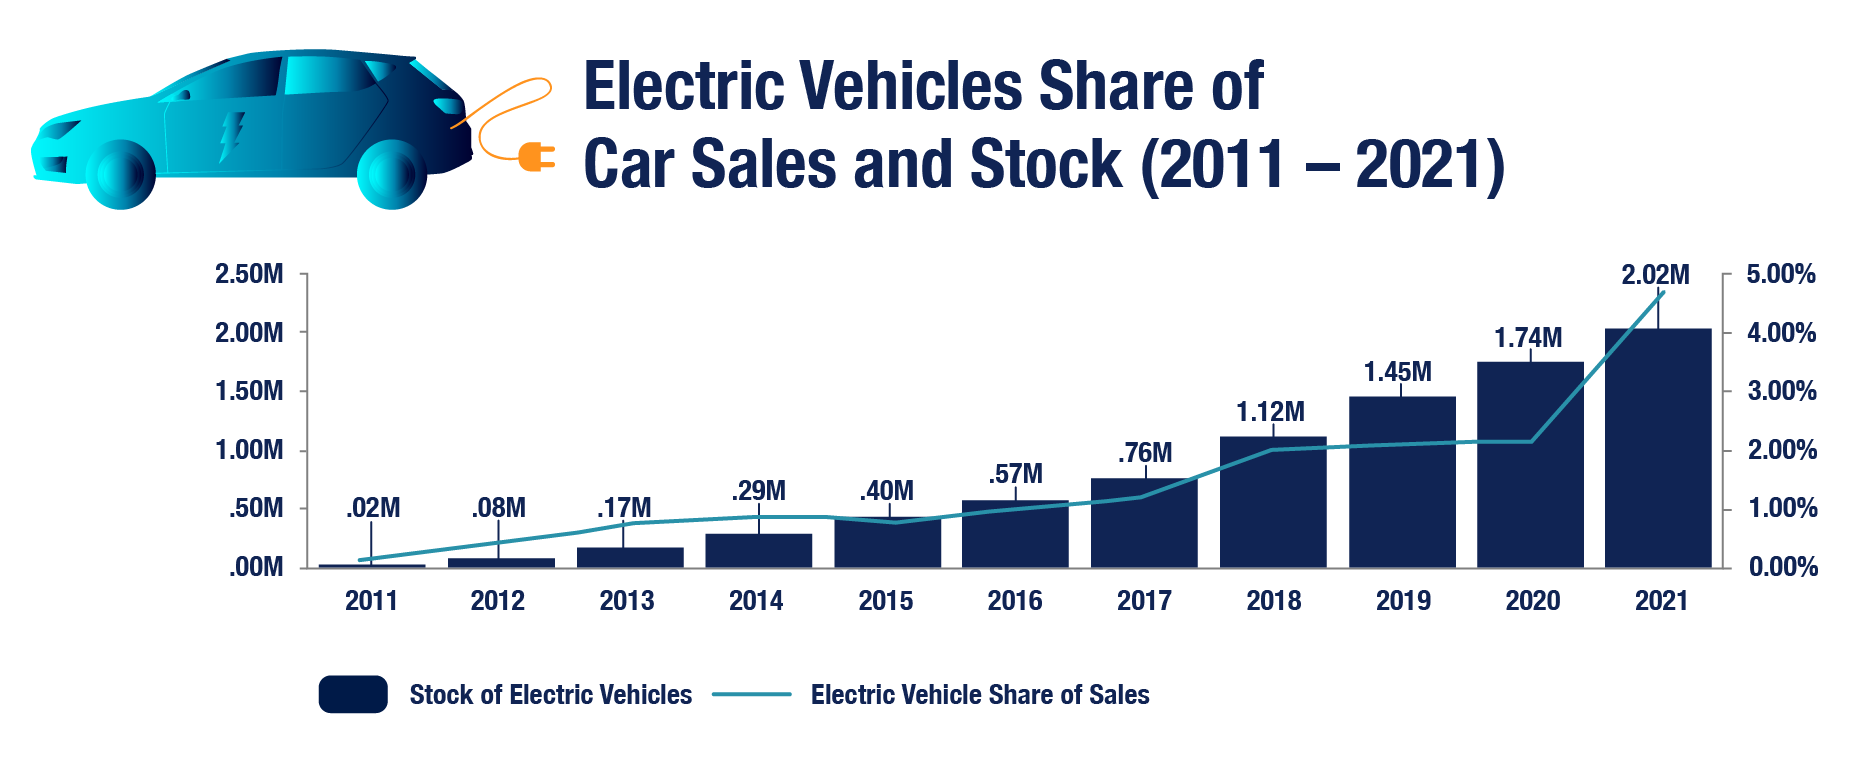 A combo chart presenting the electric vehicles share of car sales and stock from 2011 to 2021. 